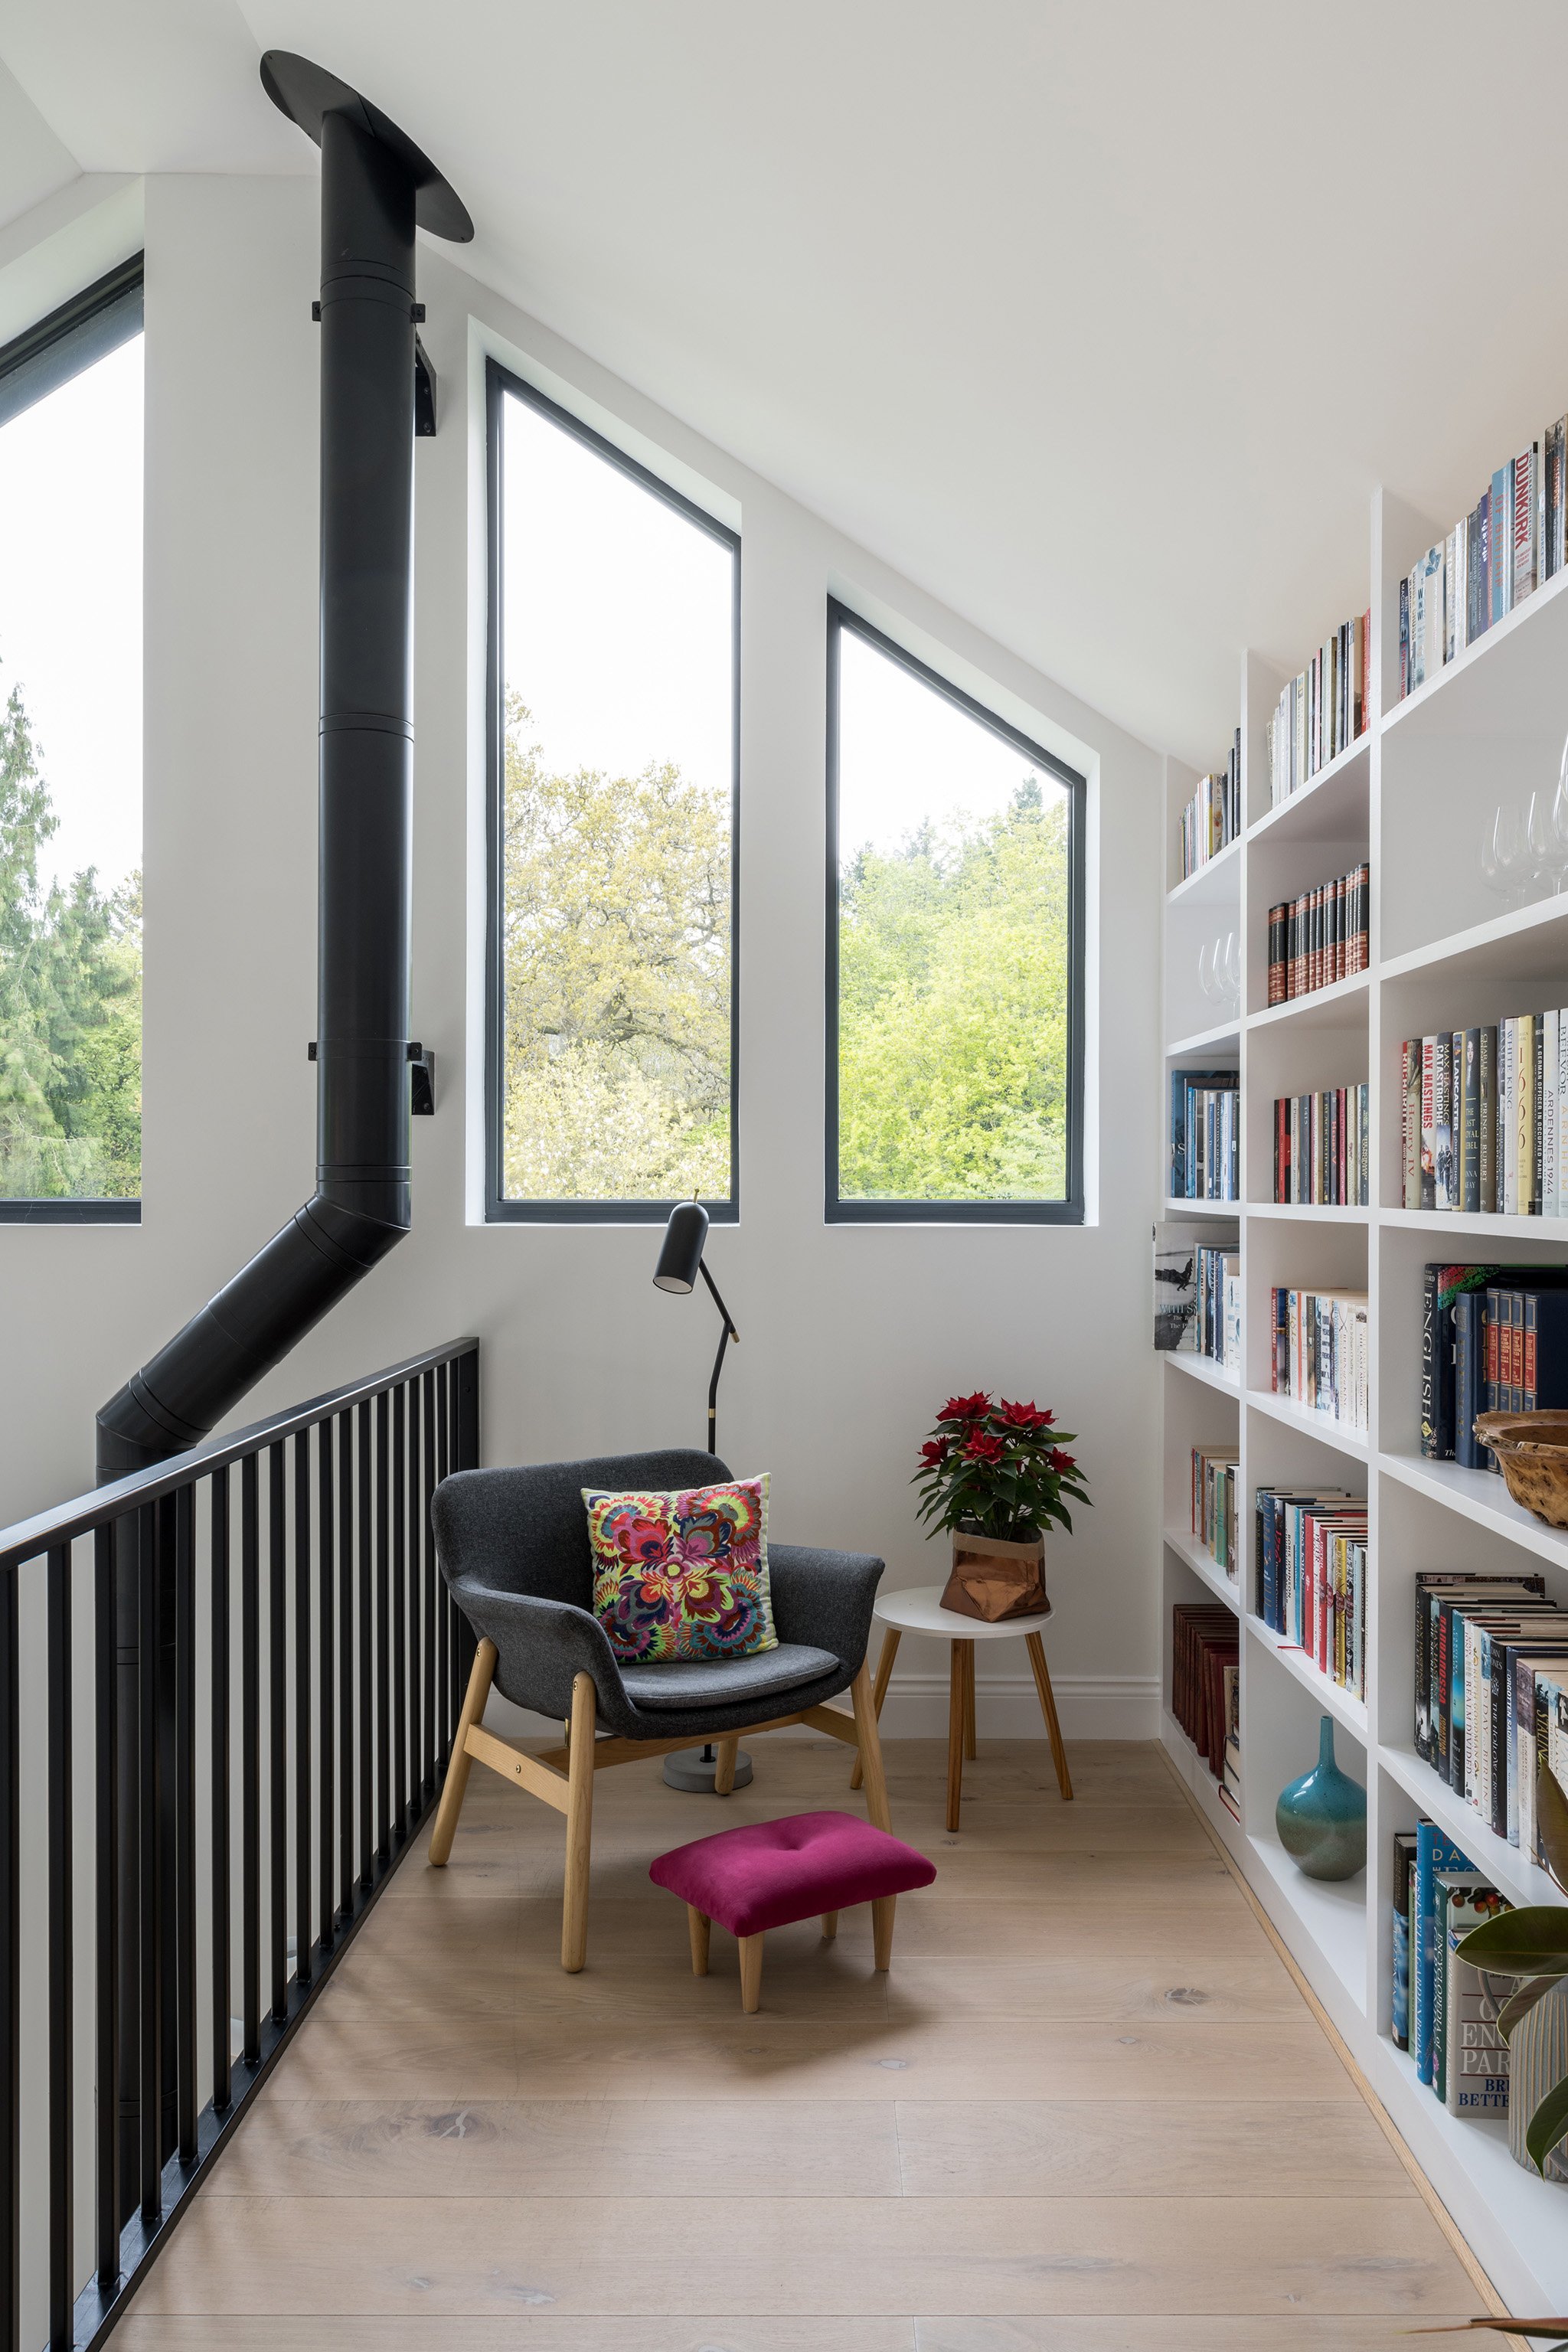 2--The-Pippins-Charred-Timber-House-Libary-Interior-Design-Architecture-London-Buckinghamshire-UK-Rider-Stirland-Architects.JPG